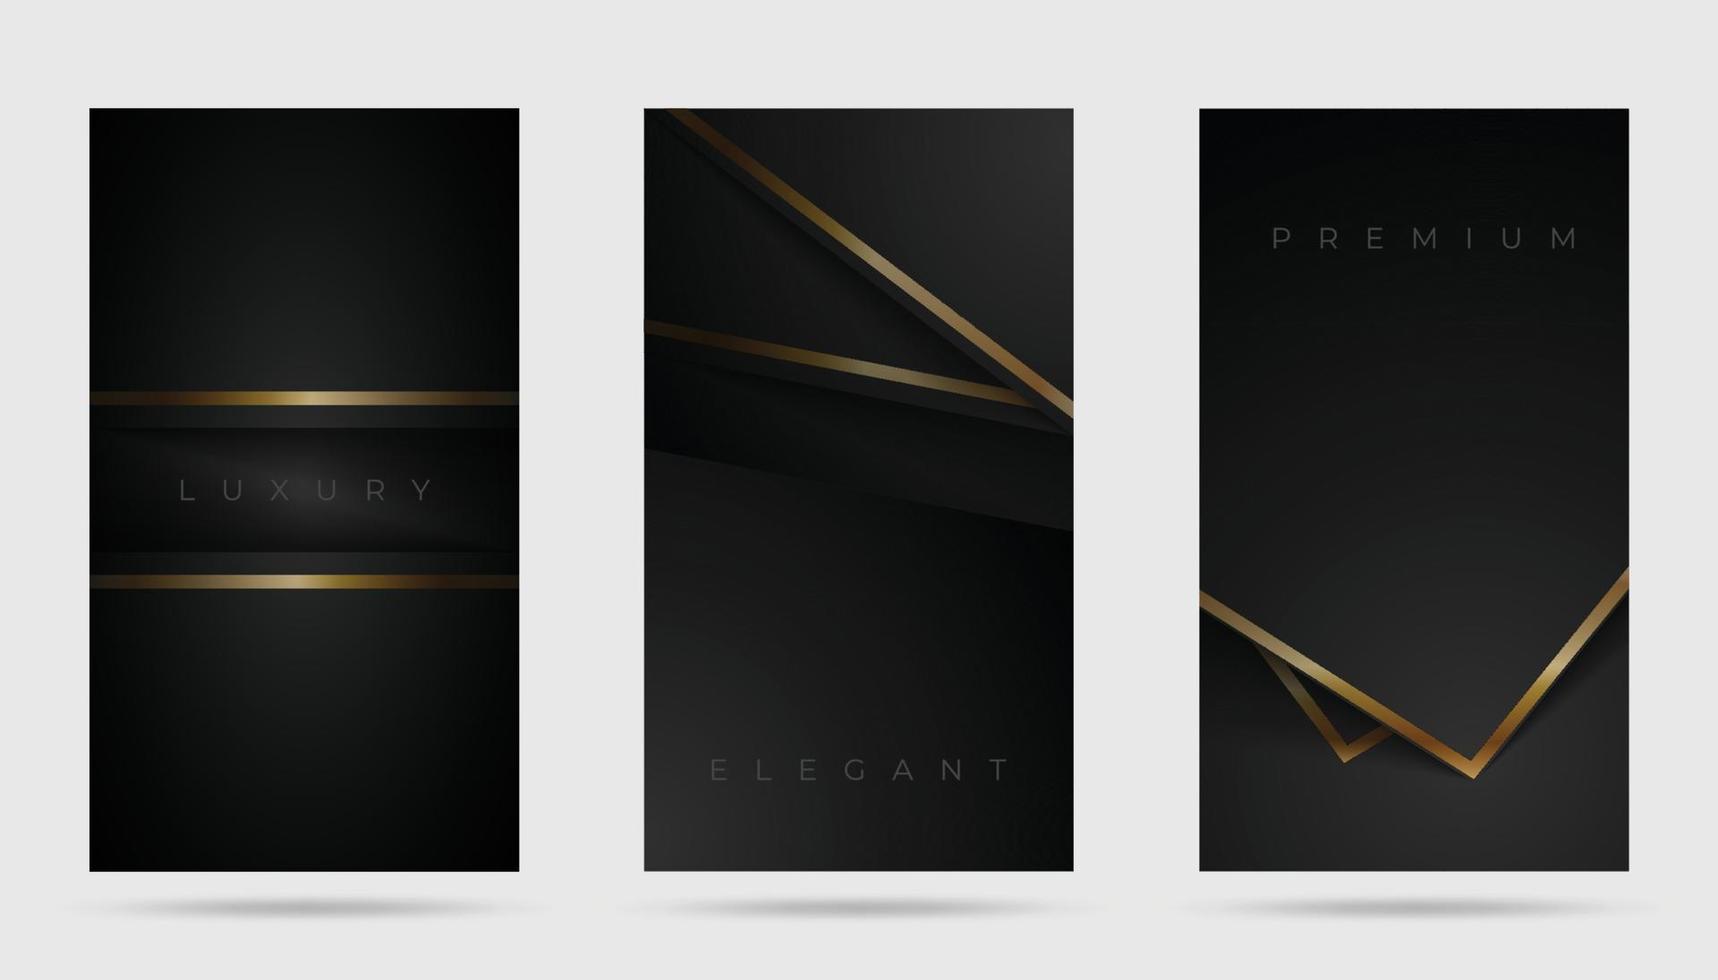 Premium black design cover set. Luxury style with gold lines on black space. Elegant cover, card, background template. Vector illustration